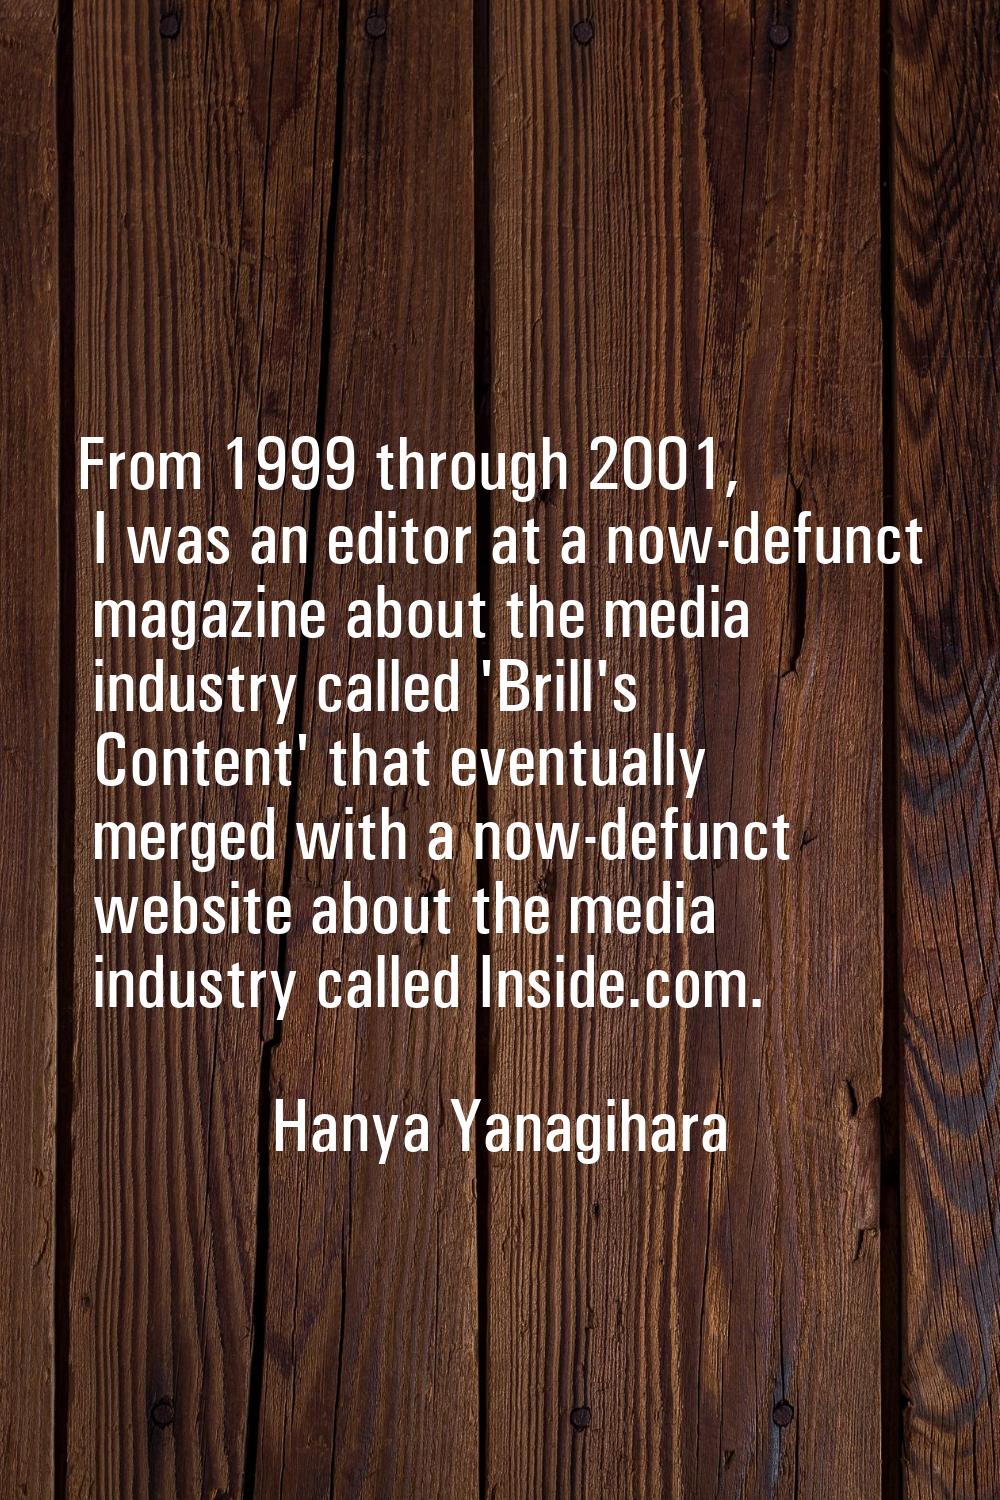 From 1999 through 2001, I was an editor at a now-defunct magazine about the media industry called '